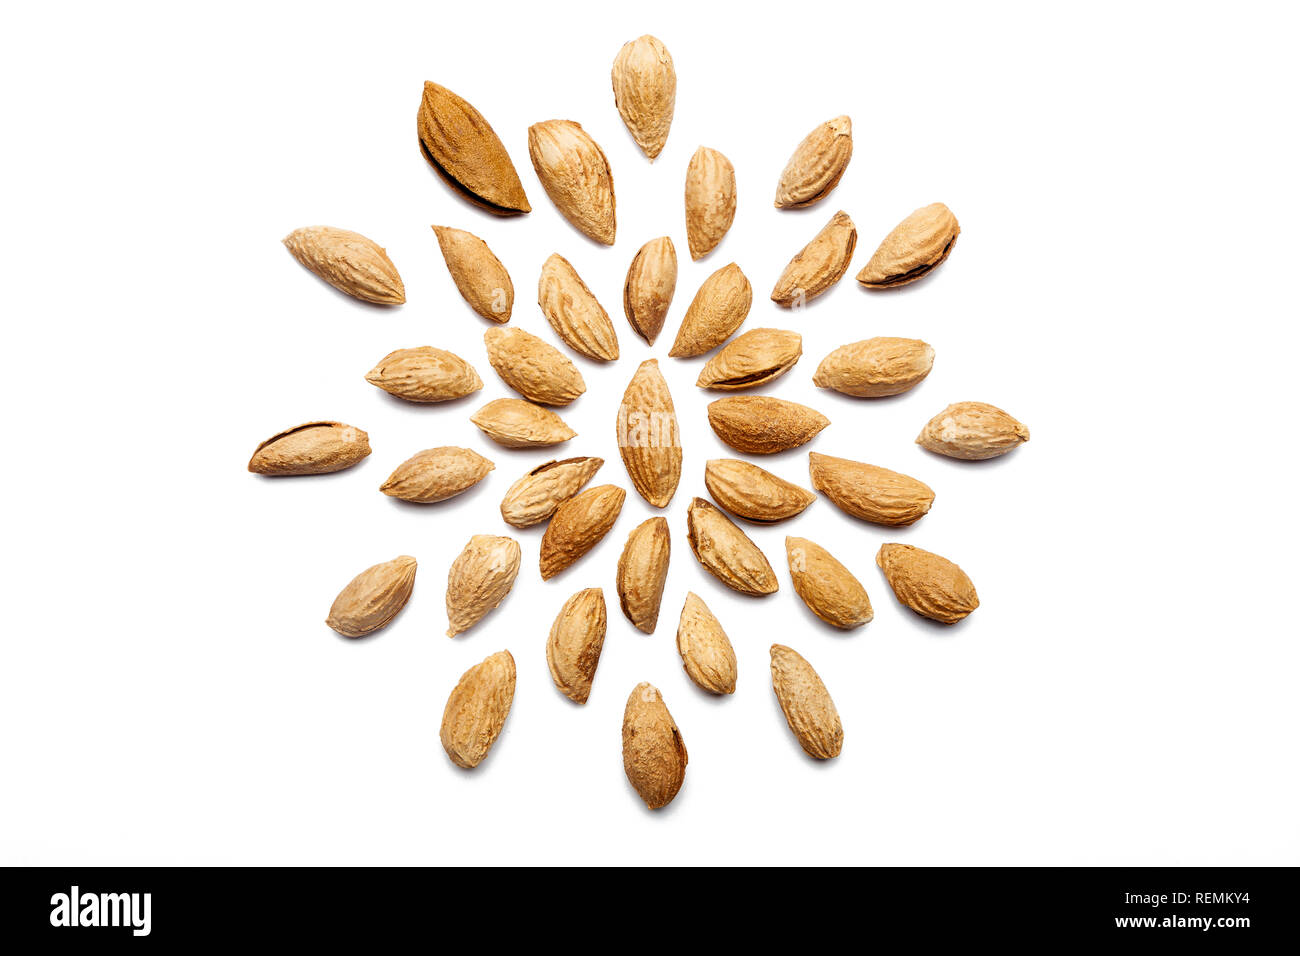 A collection of peeled almond  Badam nuts lies in the shape of a circle or sun on an isolated white background with a clipping path. Peeled Almond Bad Stock Photo